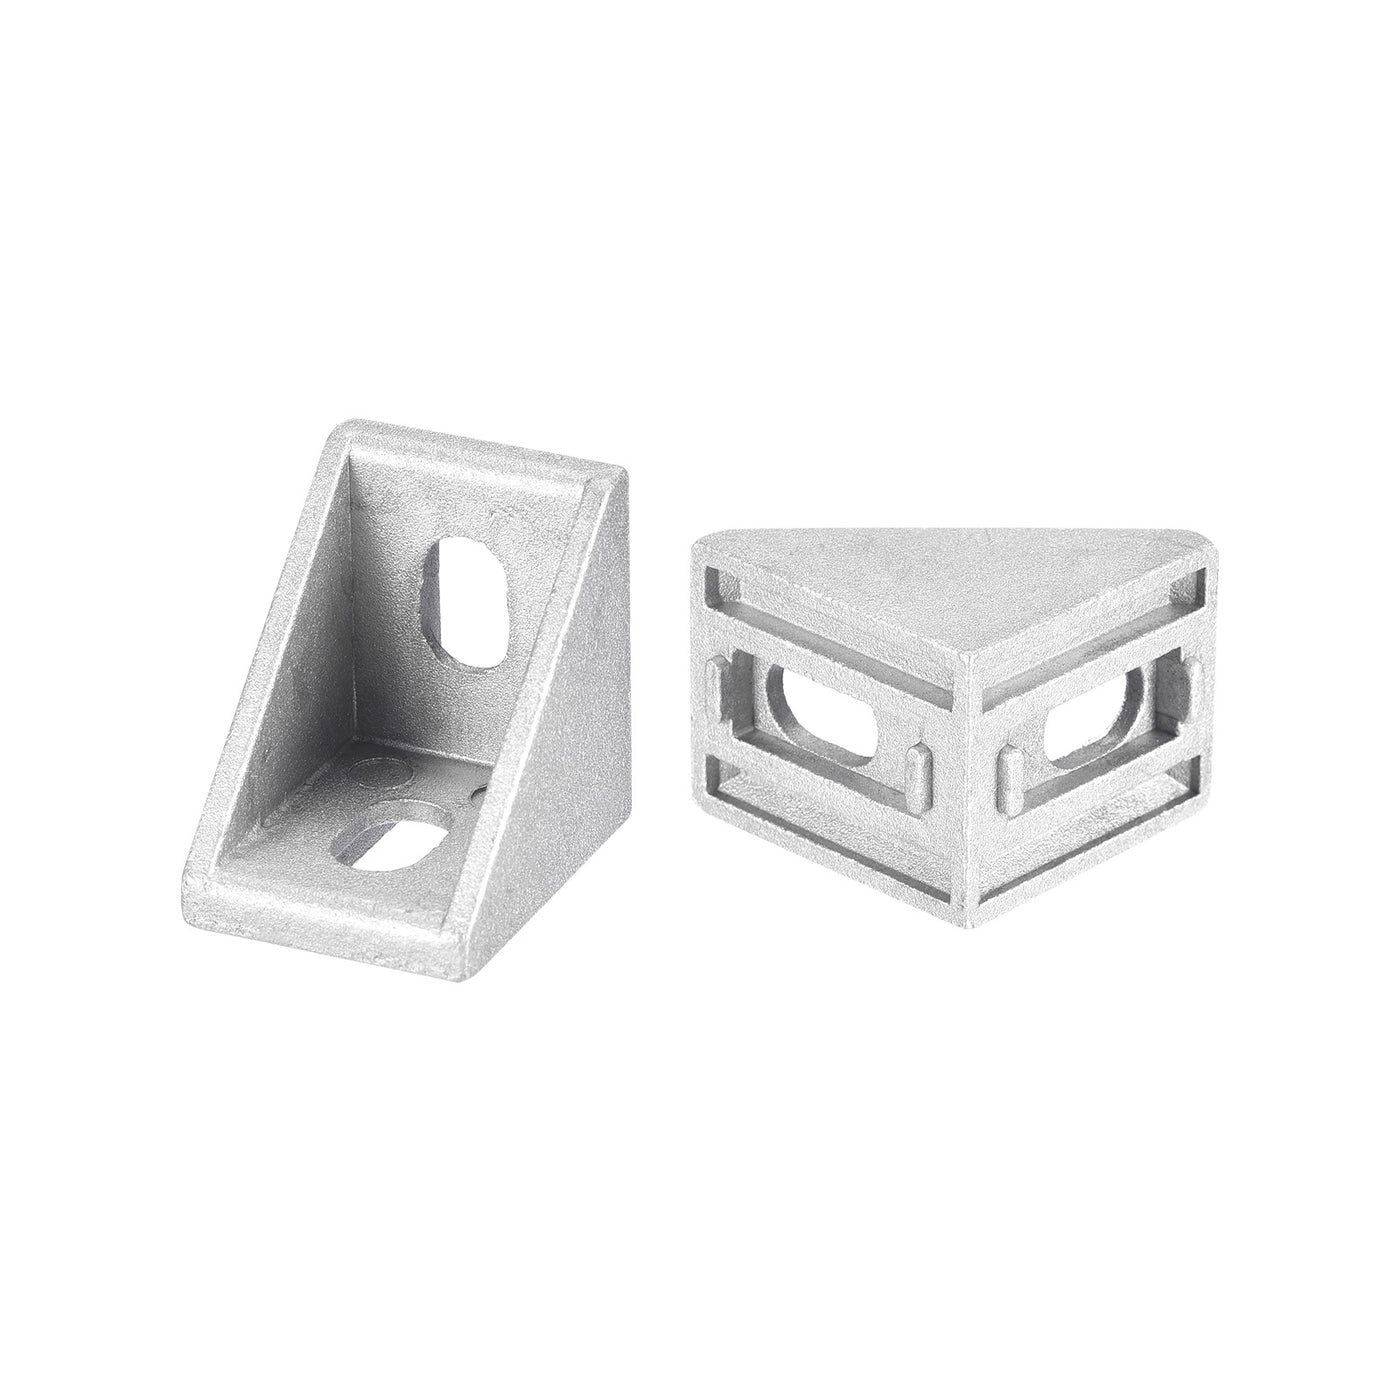 uxcell Uxcell 8Pcs Inside Corner Bracket Gusset, 30x30x24mm 2430 Angle Connectors for 2040/4040/8080 Series Aluminum Extrusion Profile Silver